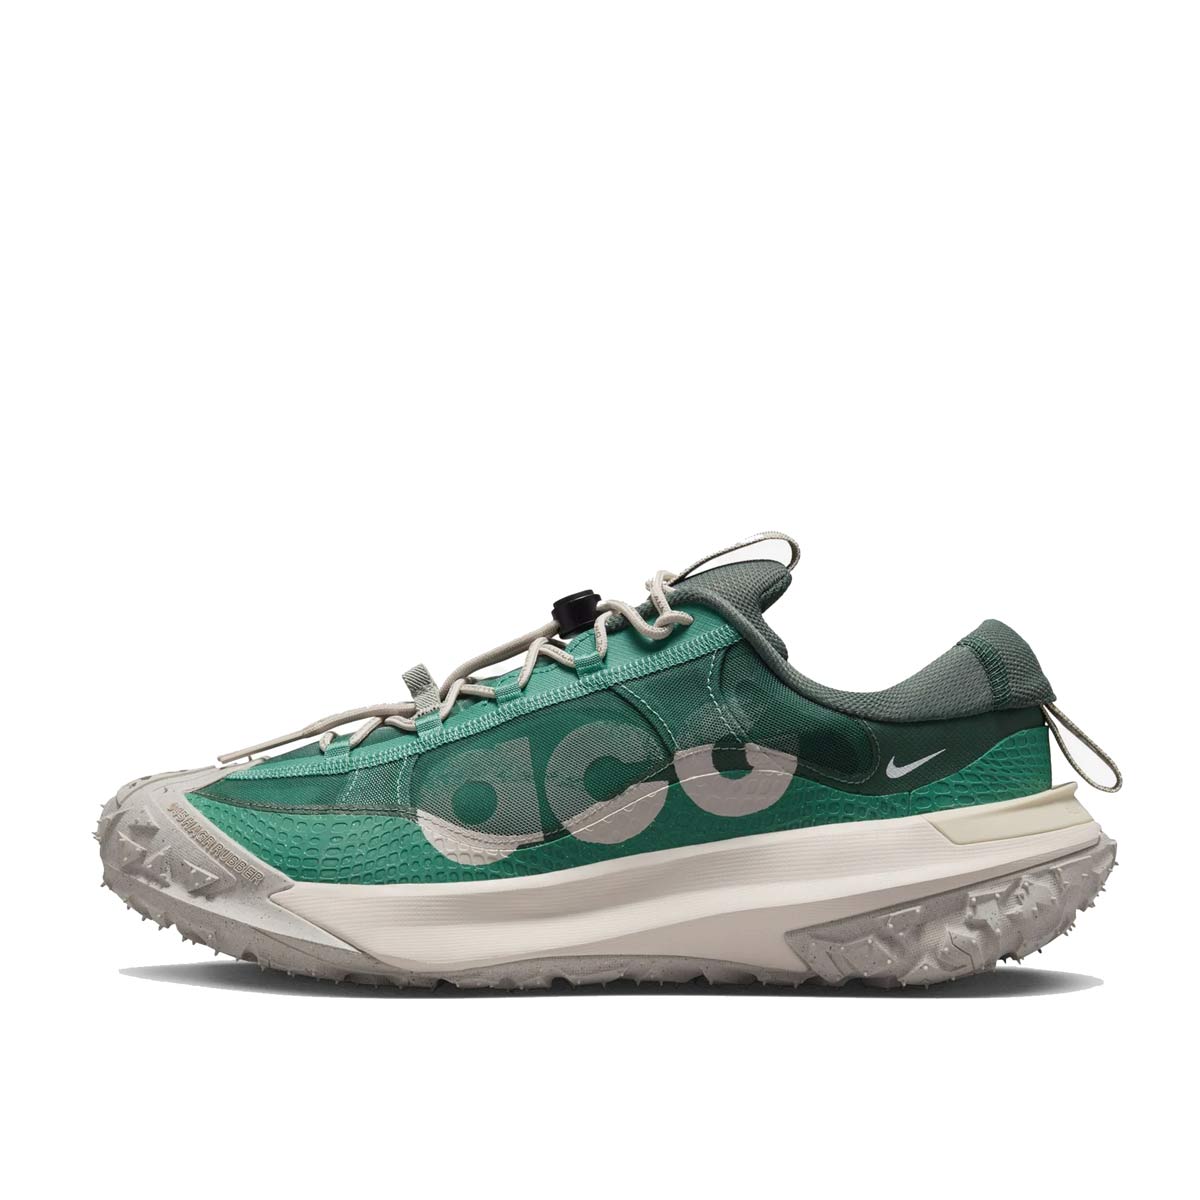 Acg Mountain Fly 2 Low